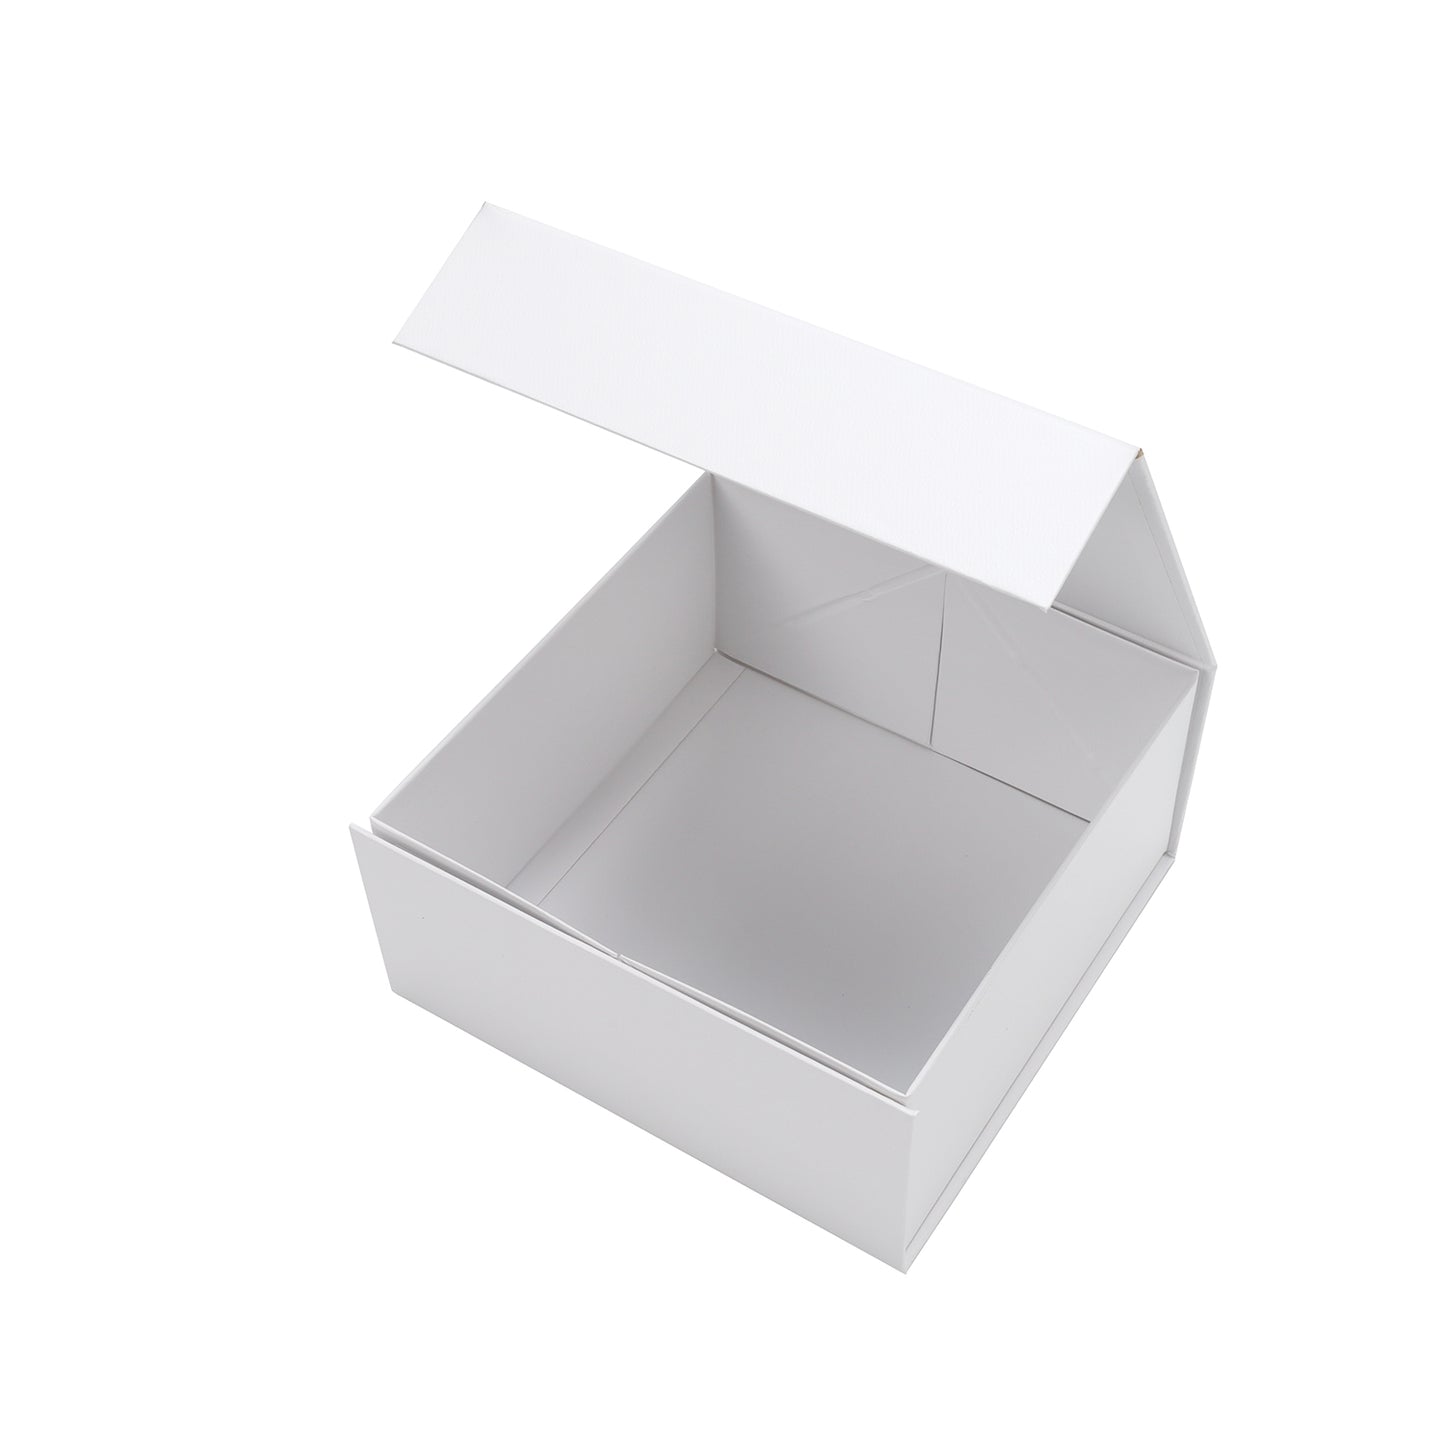 WRAPLA 20X20X10CM White Gift Box- Collapsible Gift Box with Magnetic Closure and Tissue Paper, Perfect for Birthday, Party, Holiday, Wedding, Graduation